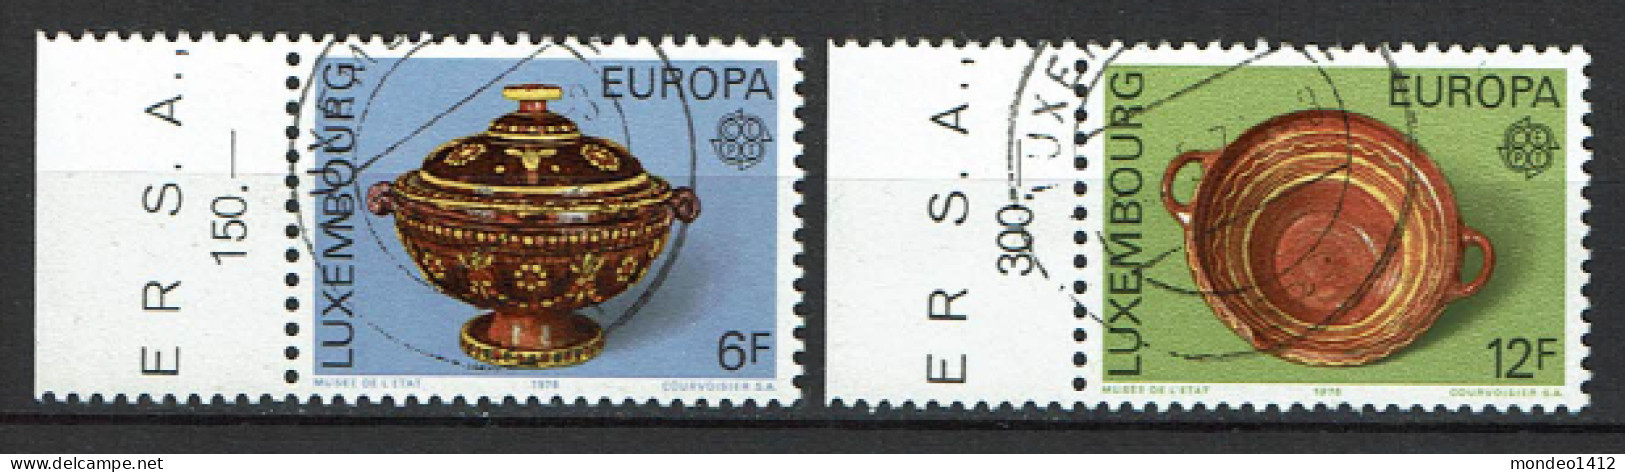 Luxembourg 1975 - YT 878/879 - EUROPA Stamps - Handicrafts, Oeuvres Artisanales - Used Stamps